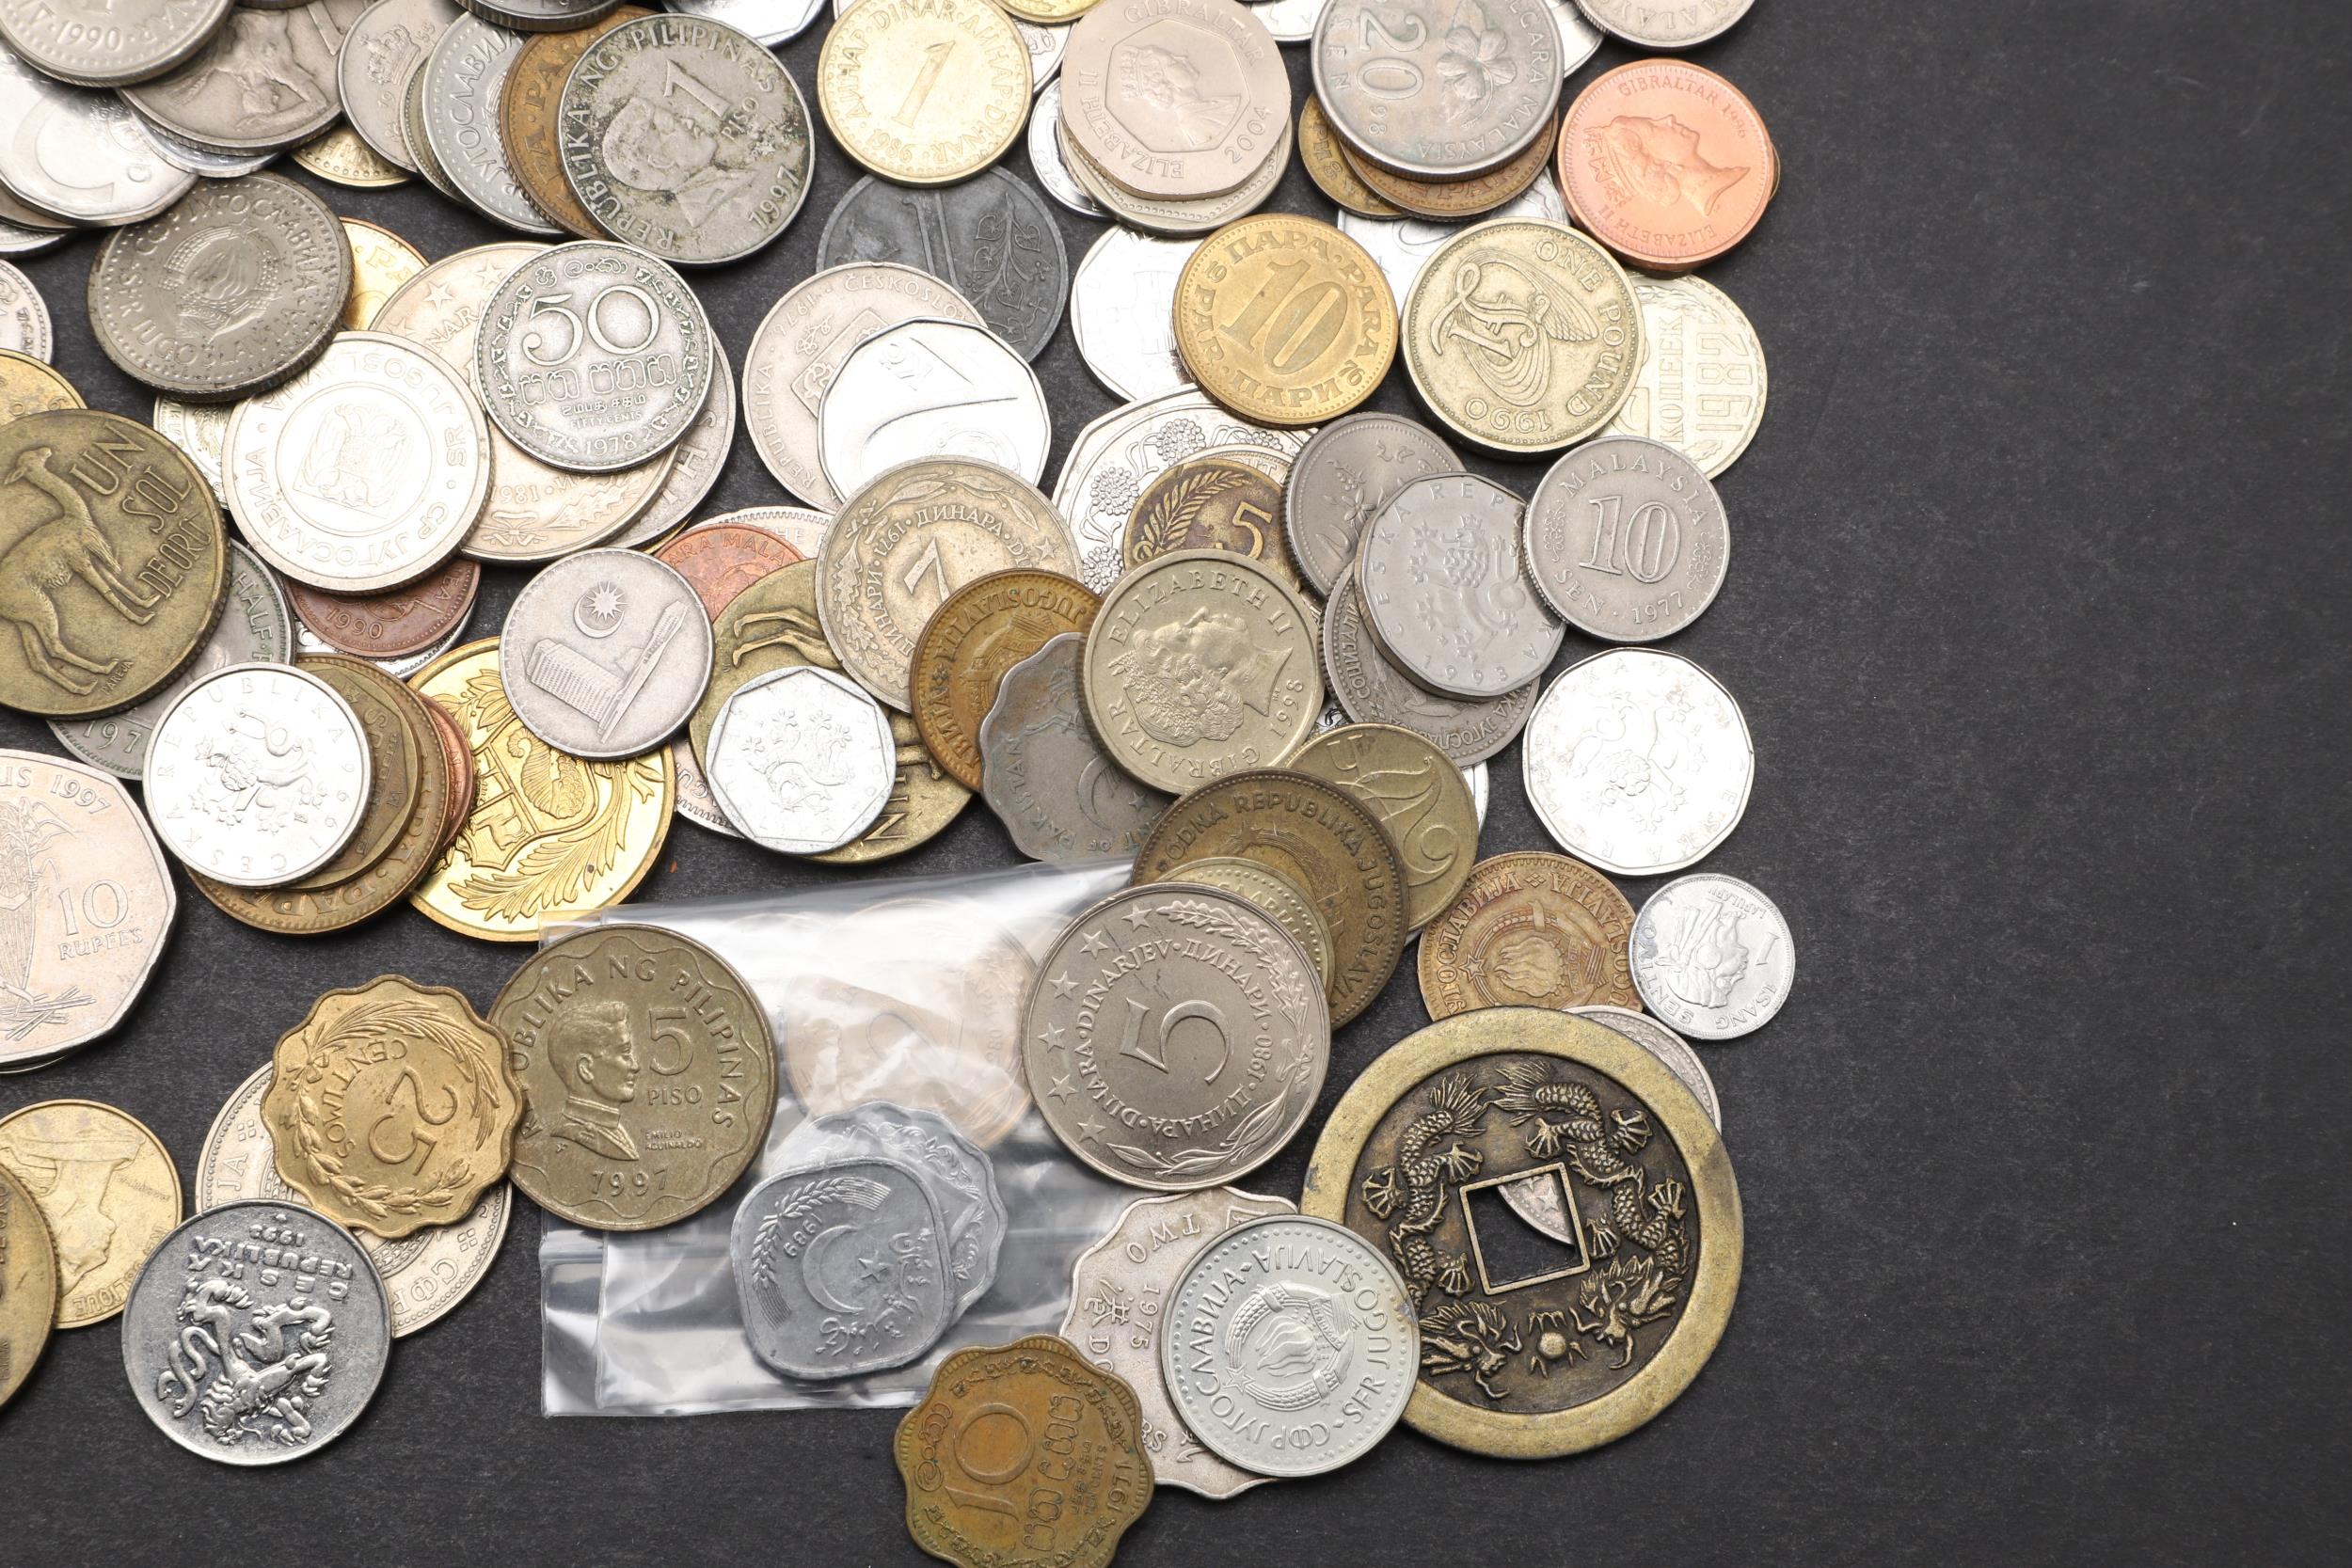 A COLLECTION OF WORLD COINS, VARIOUS COUNTIRES TO INCLUDE MALAYA, CHINA, GIBRALTAR AND MANY OTHERS. - Image 10 of 10